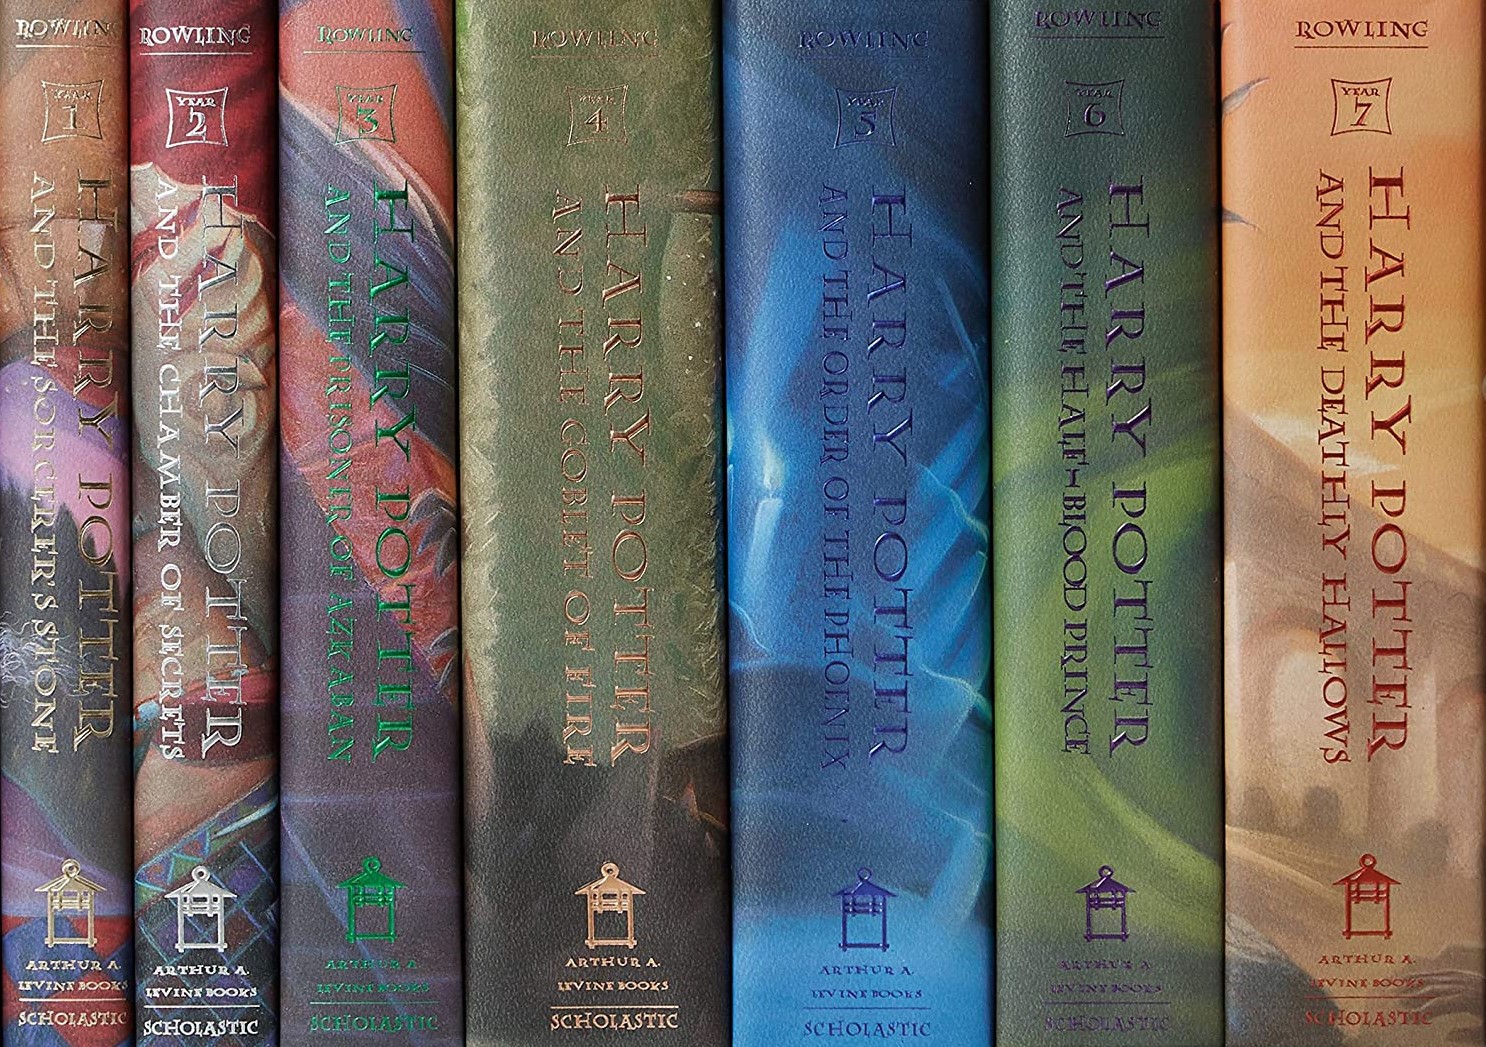 image of the spines of the seven books in the Harry Potter series